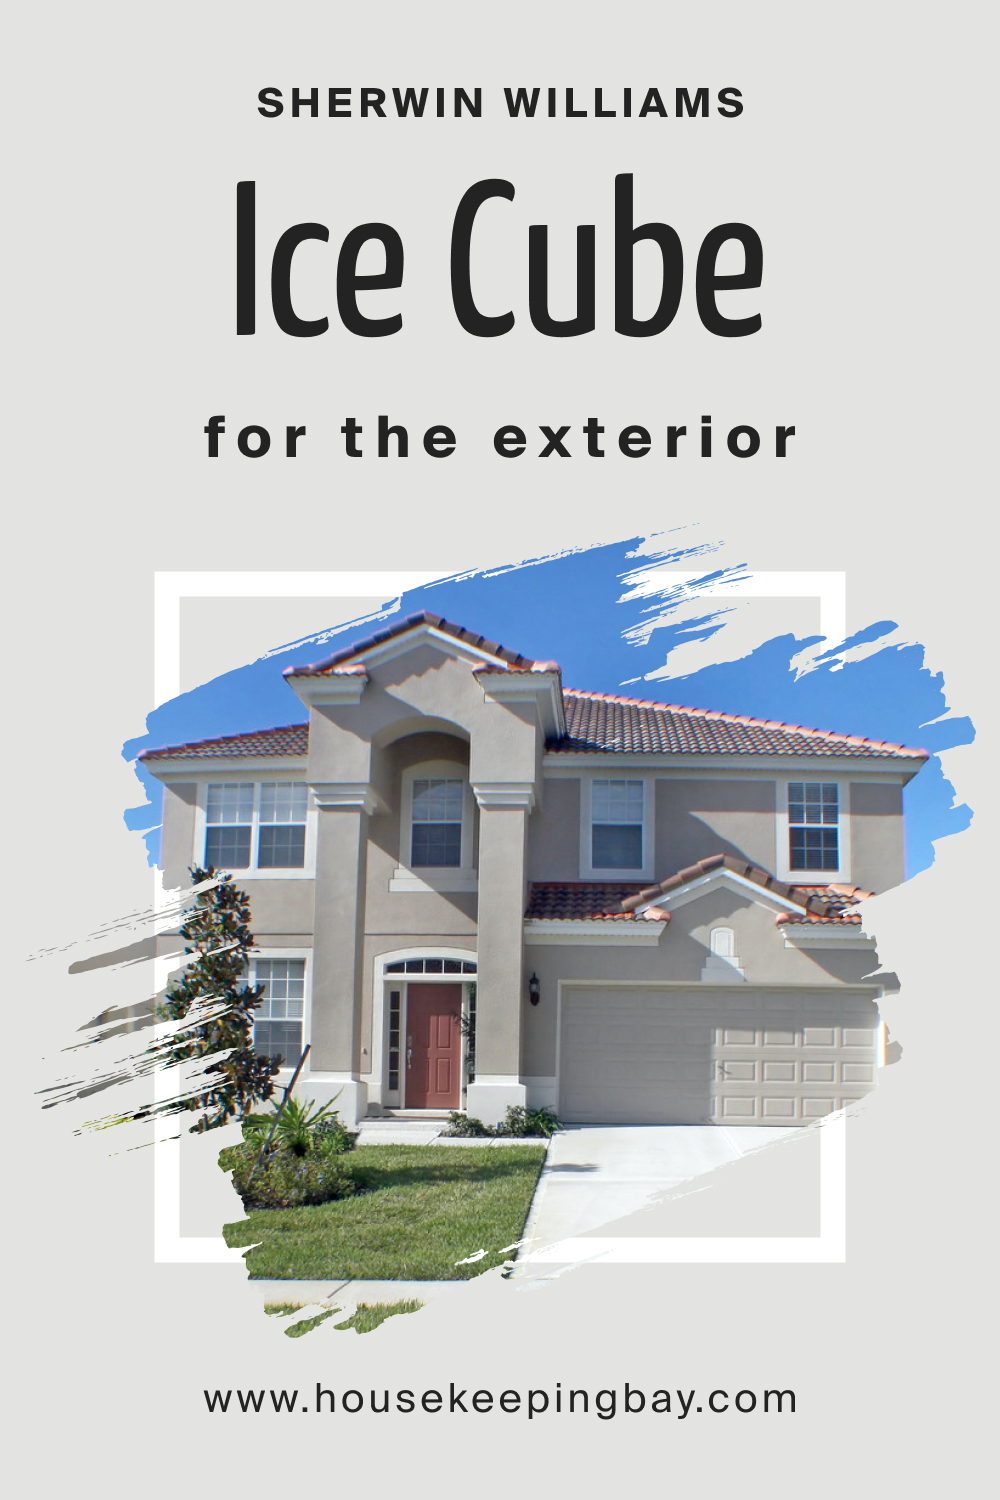 Sherwin Williams. SW 6252 Ice Cube For the exterior